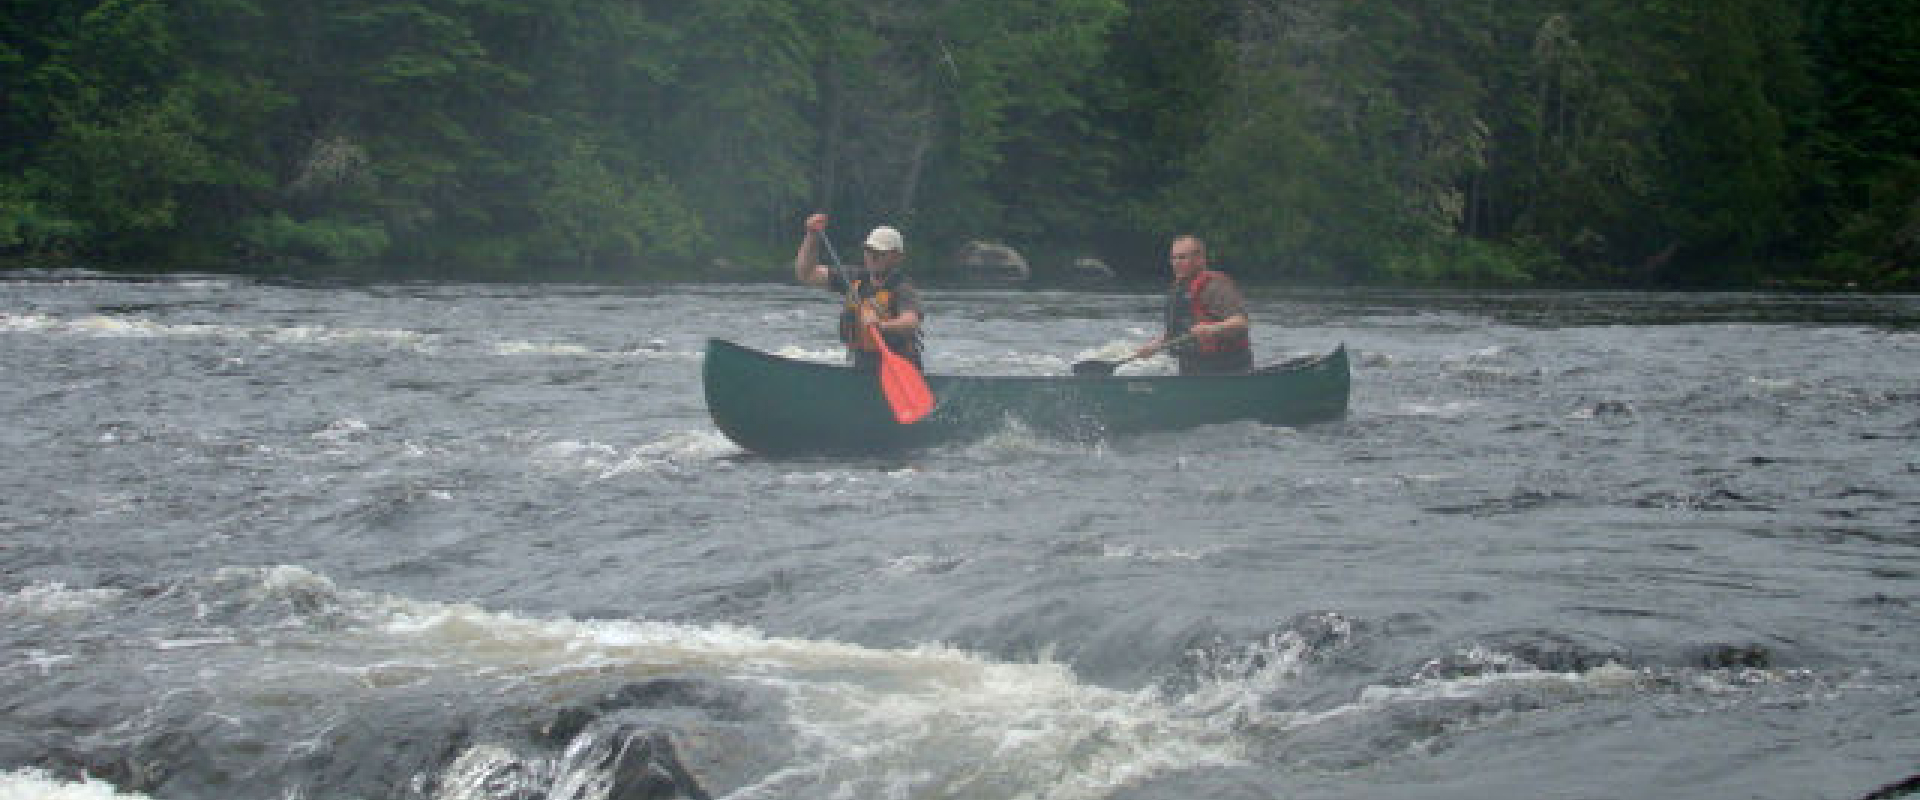 Two people in a green canoe paddle through the misty Canoose Ledges towards the rapids of the St. Croix River. 